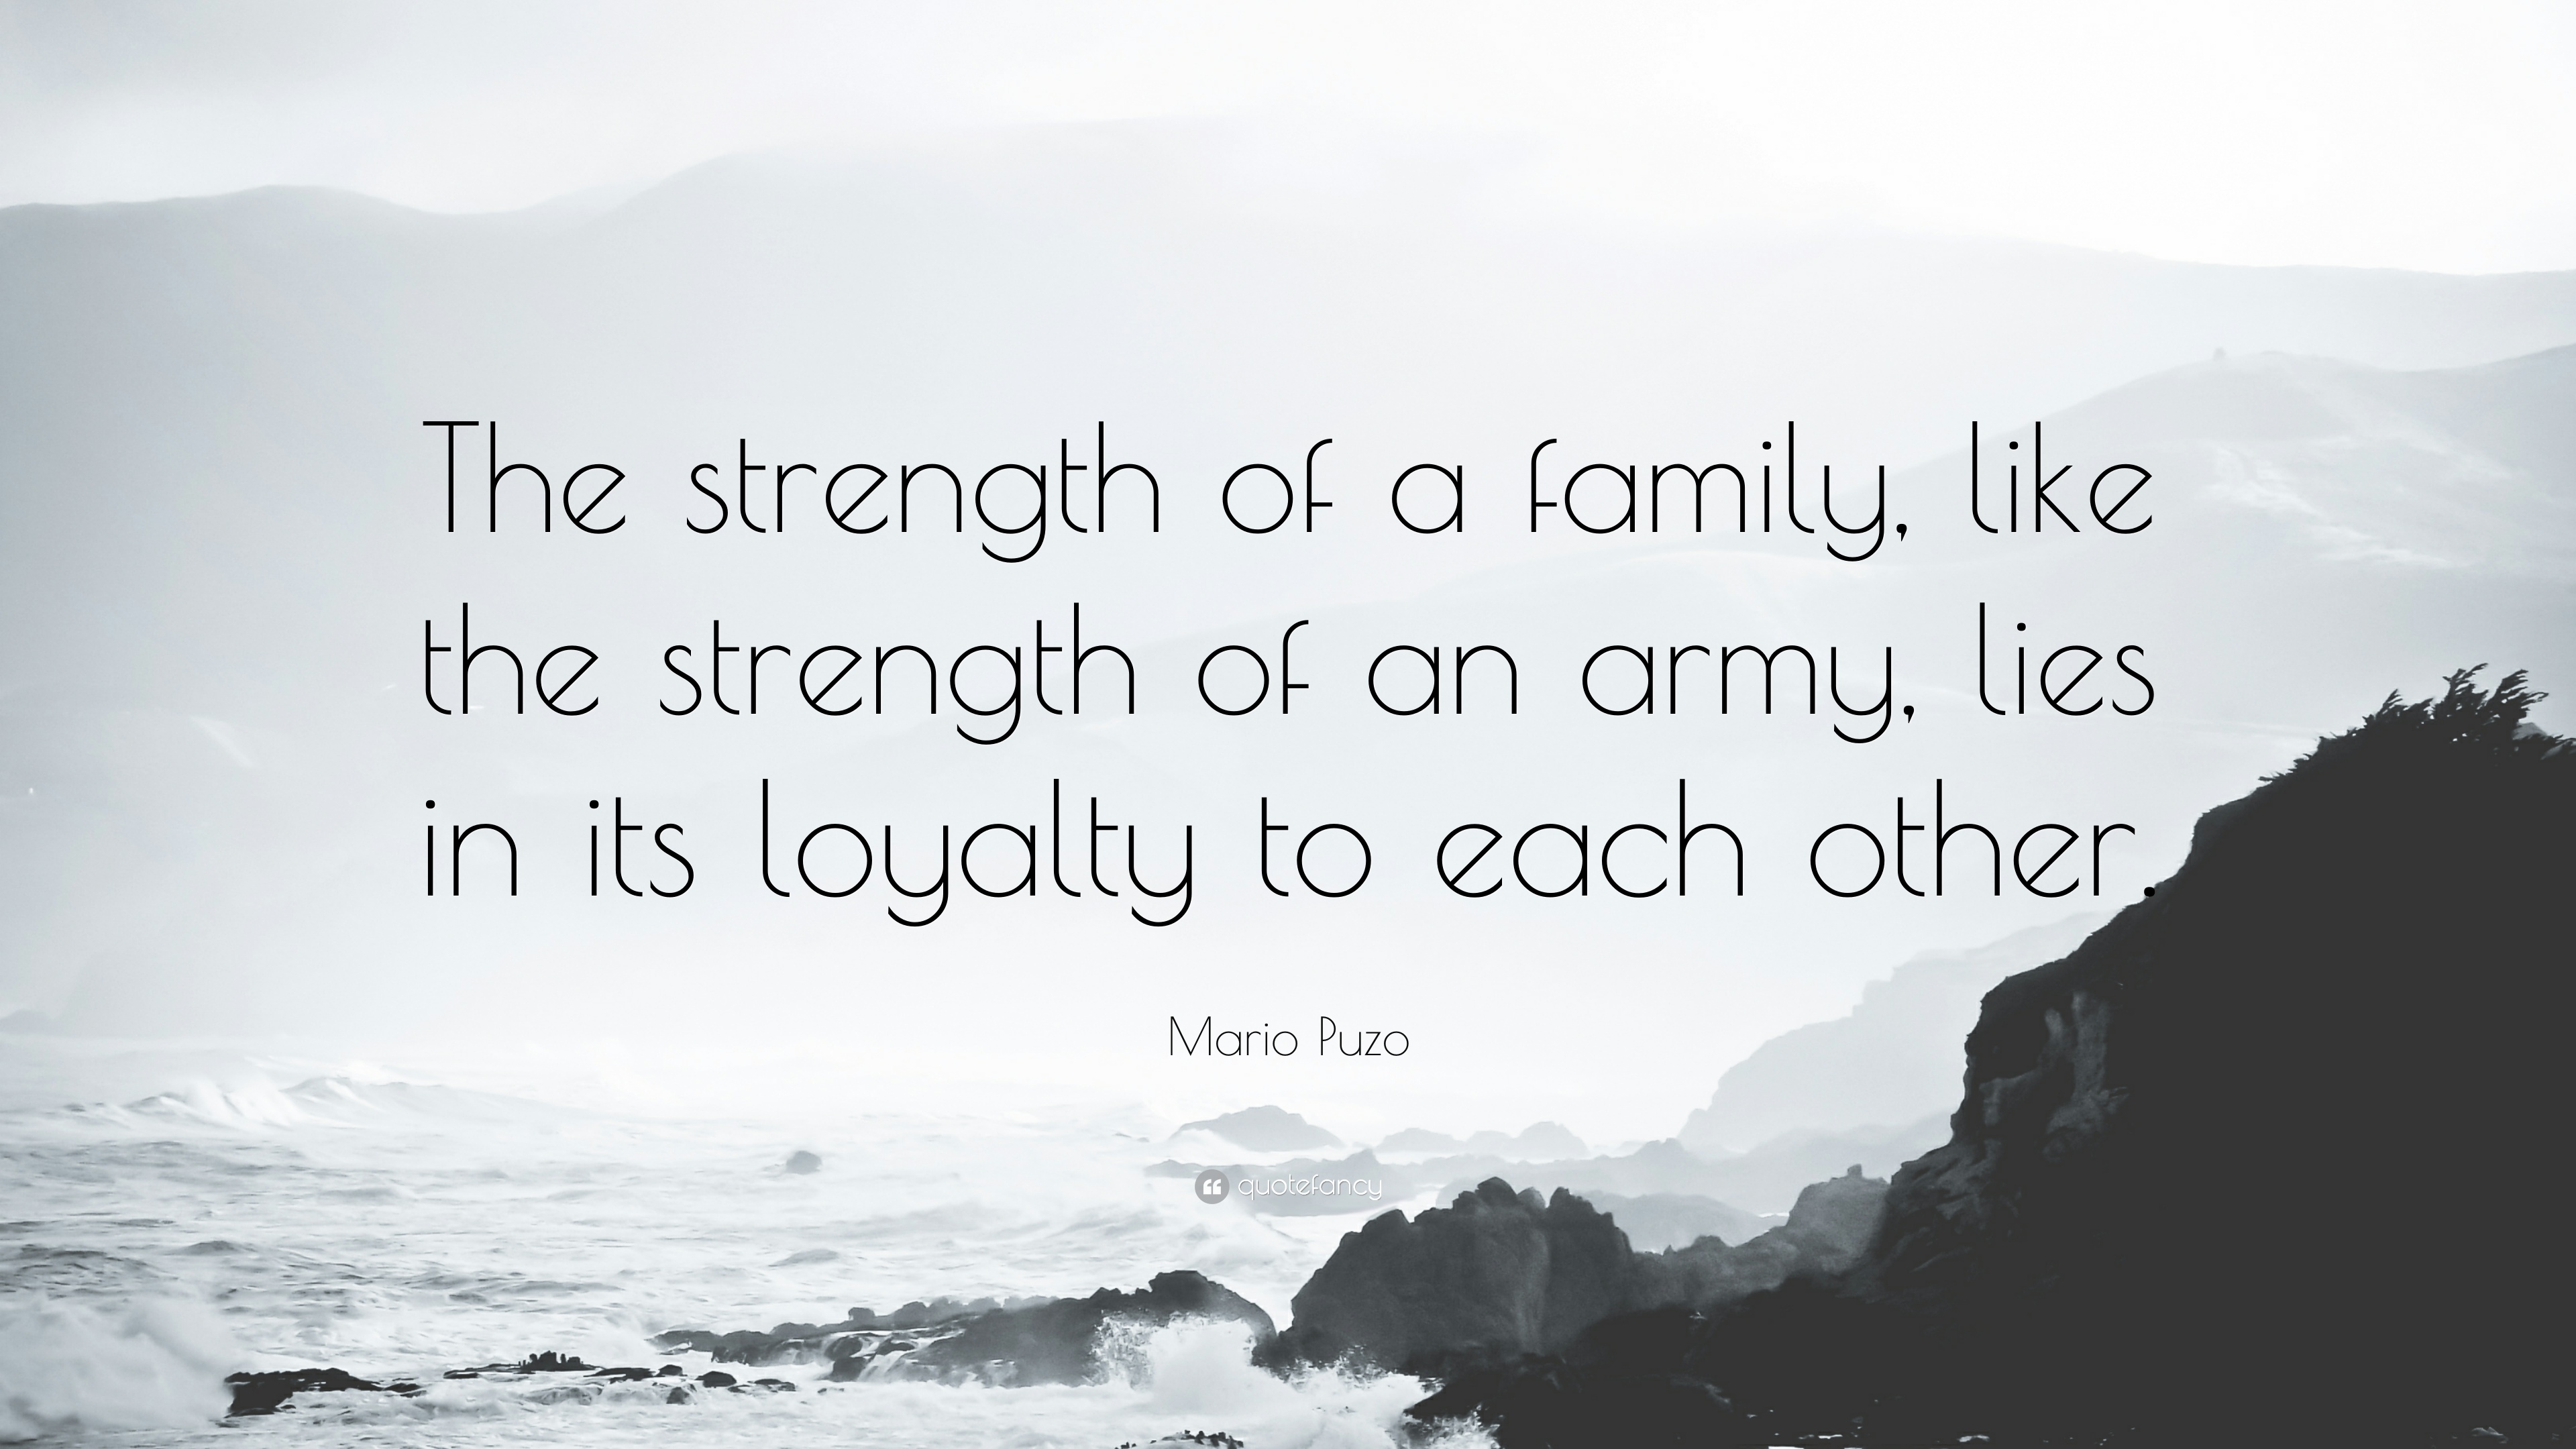 The strength of a family, like the strength of an army, lies in its loyalty to each other. Mario Puzo